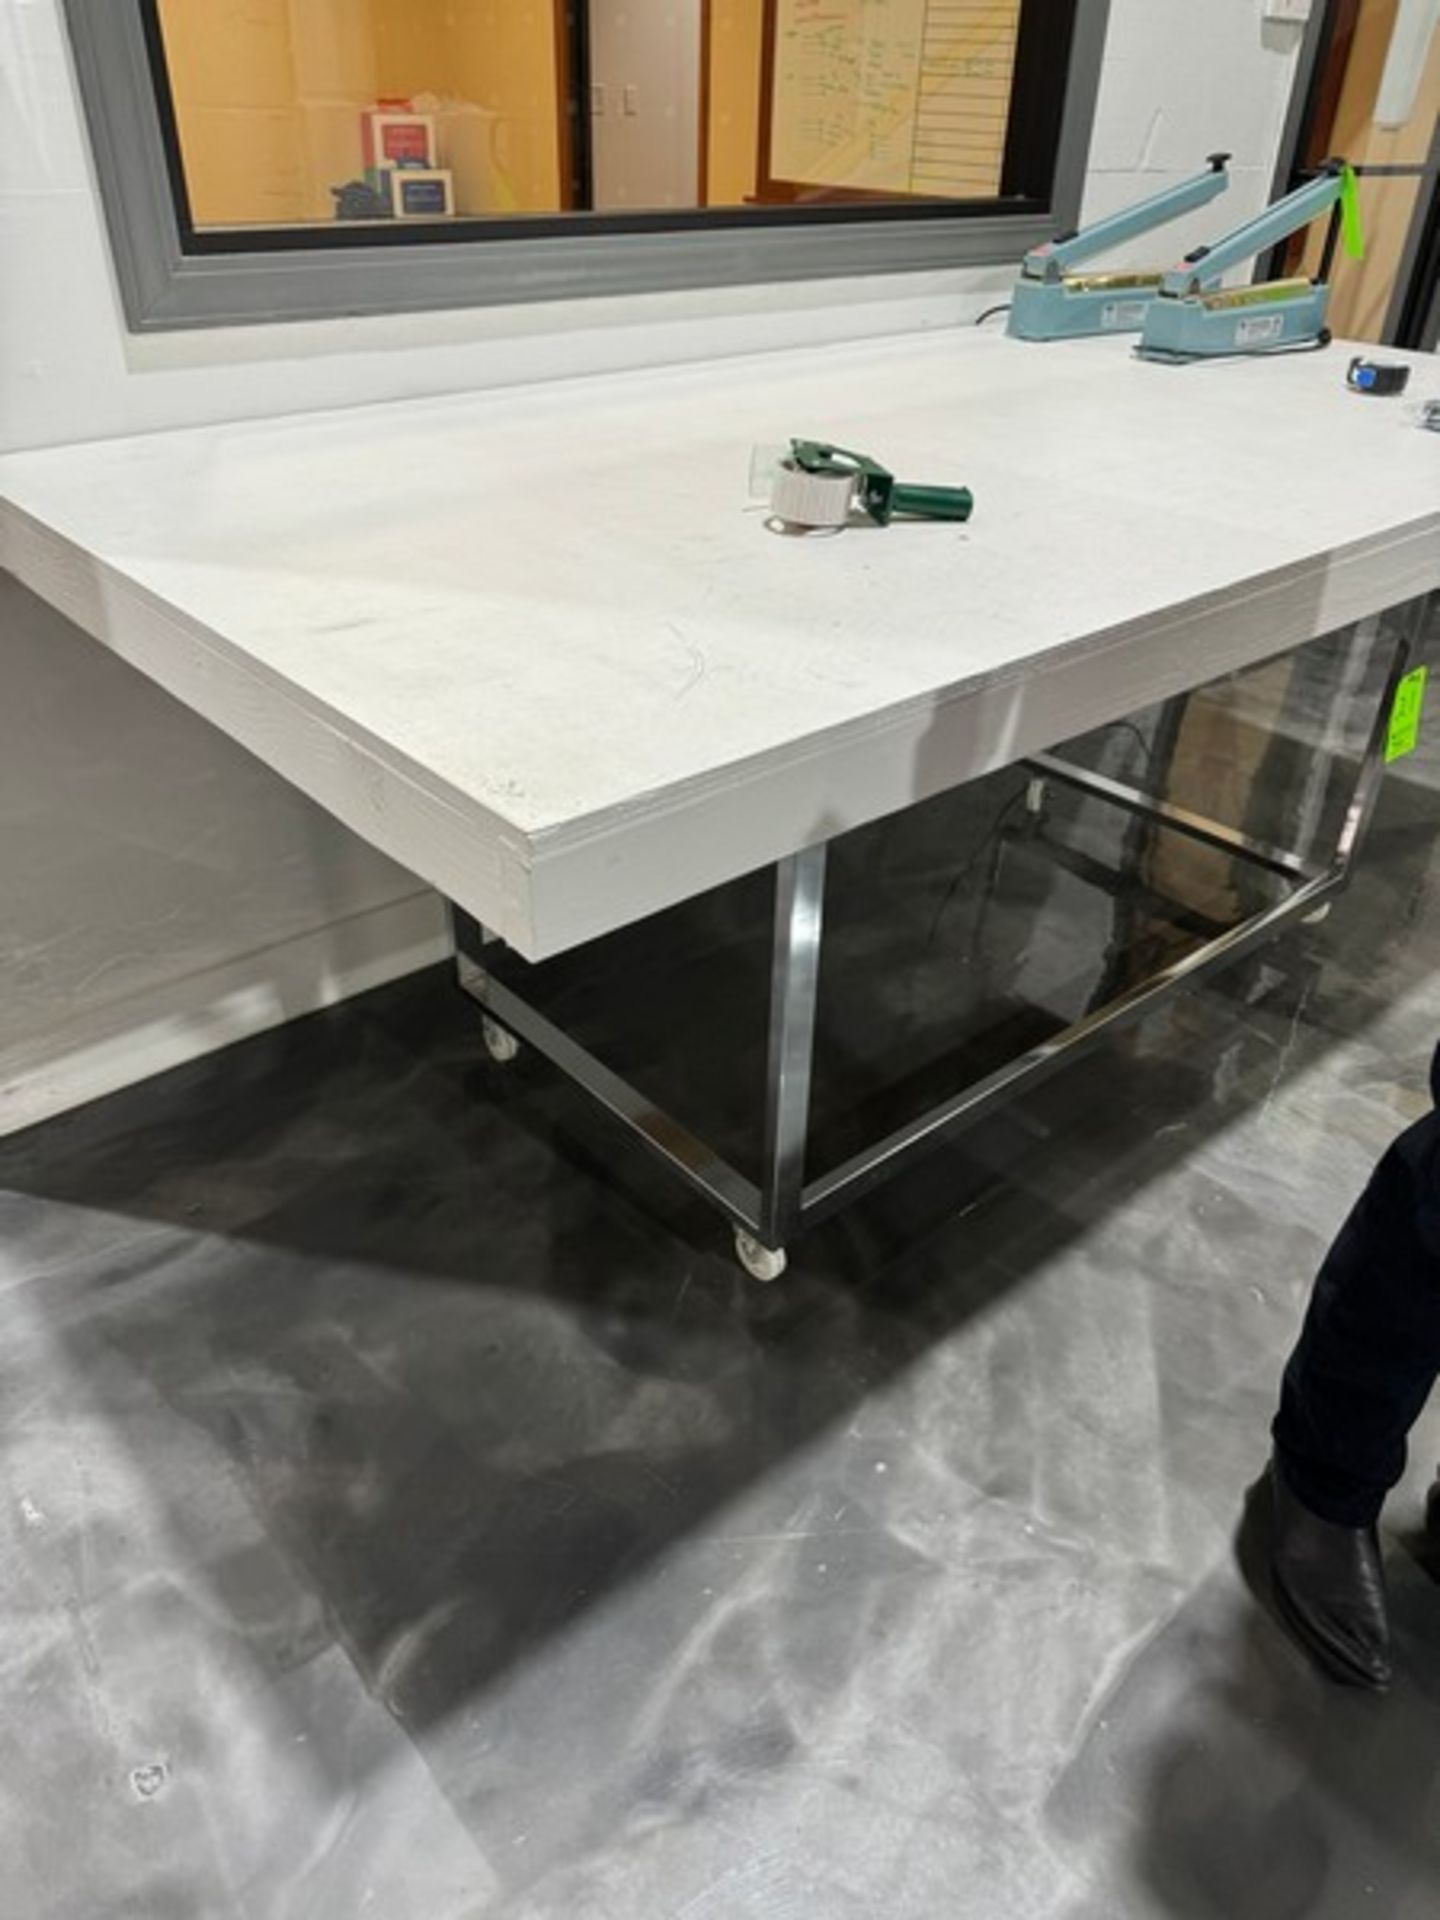 Shop Table, Aprox. 7 ft. L x 3 ft. W x 3.5 ft. H, Mounted on Portable Frame (LOCATED IN MOUNT - Image 4 of 4